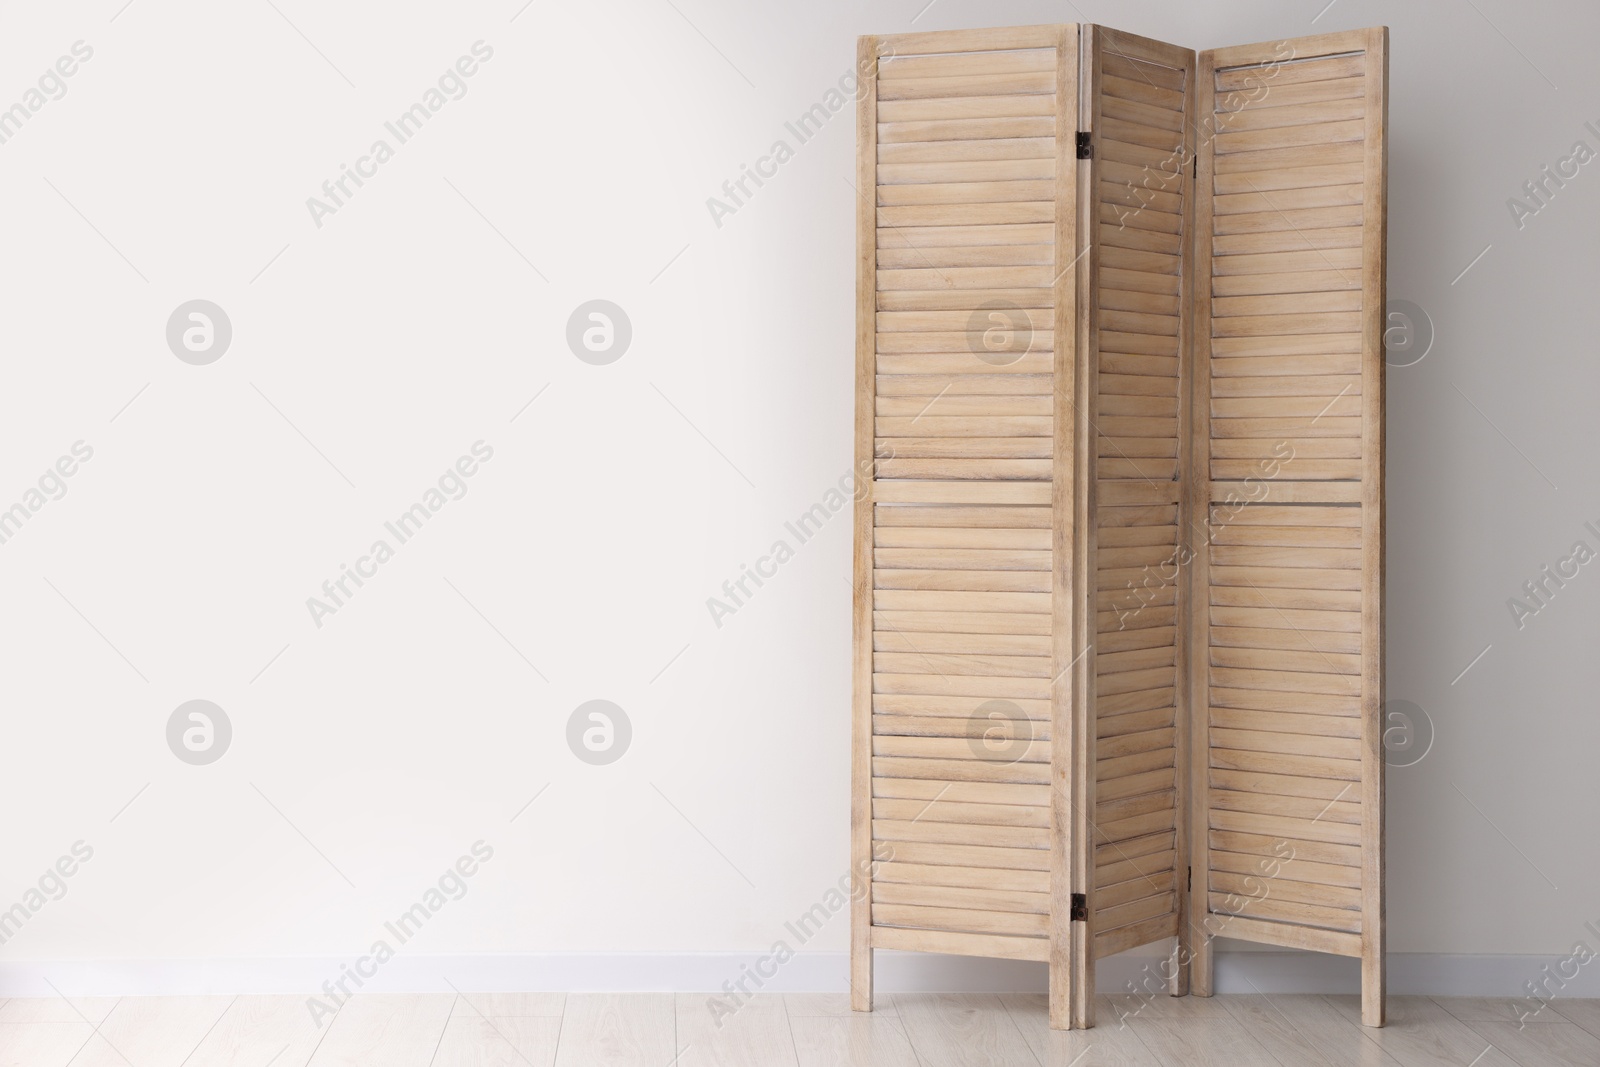 Photo of Wooden folding screen near white wall indoors, space for text